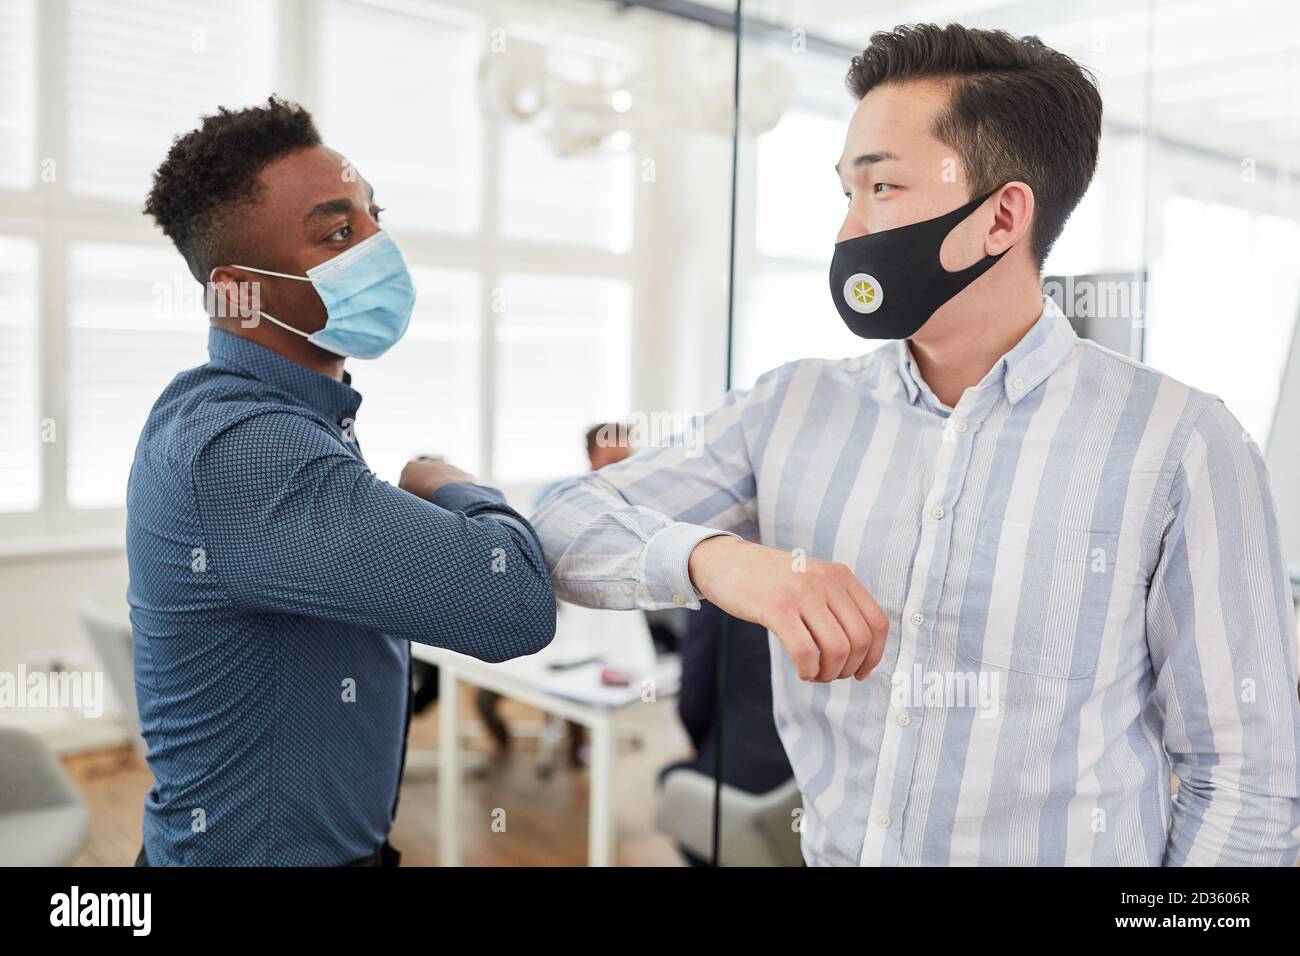 Business people when greeting with the elbow as protection against Covid-19 Stock Photo